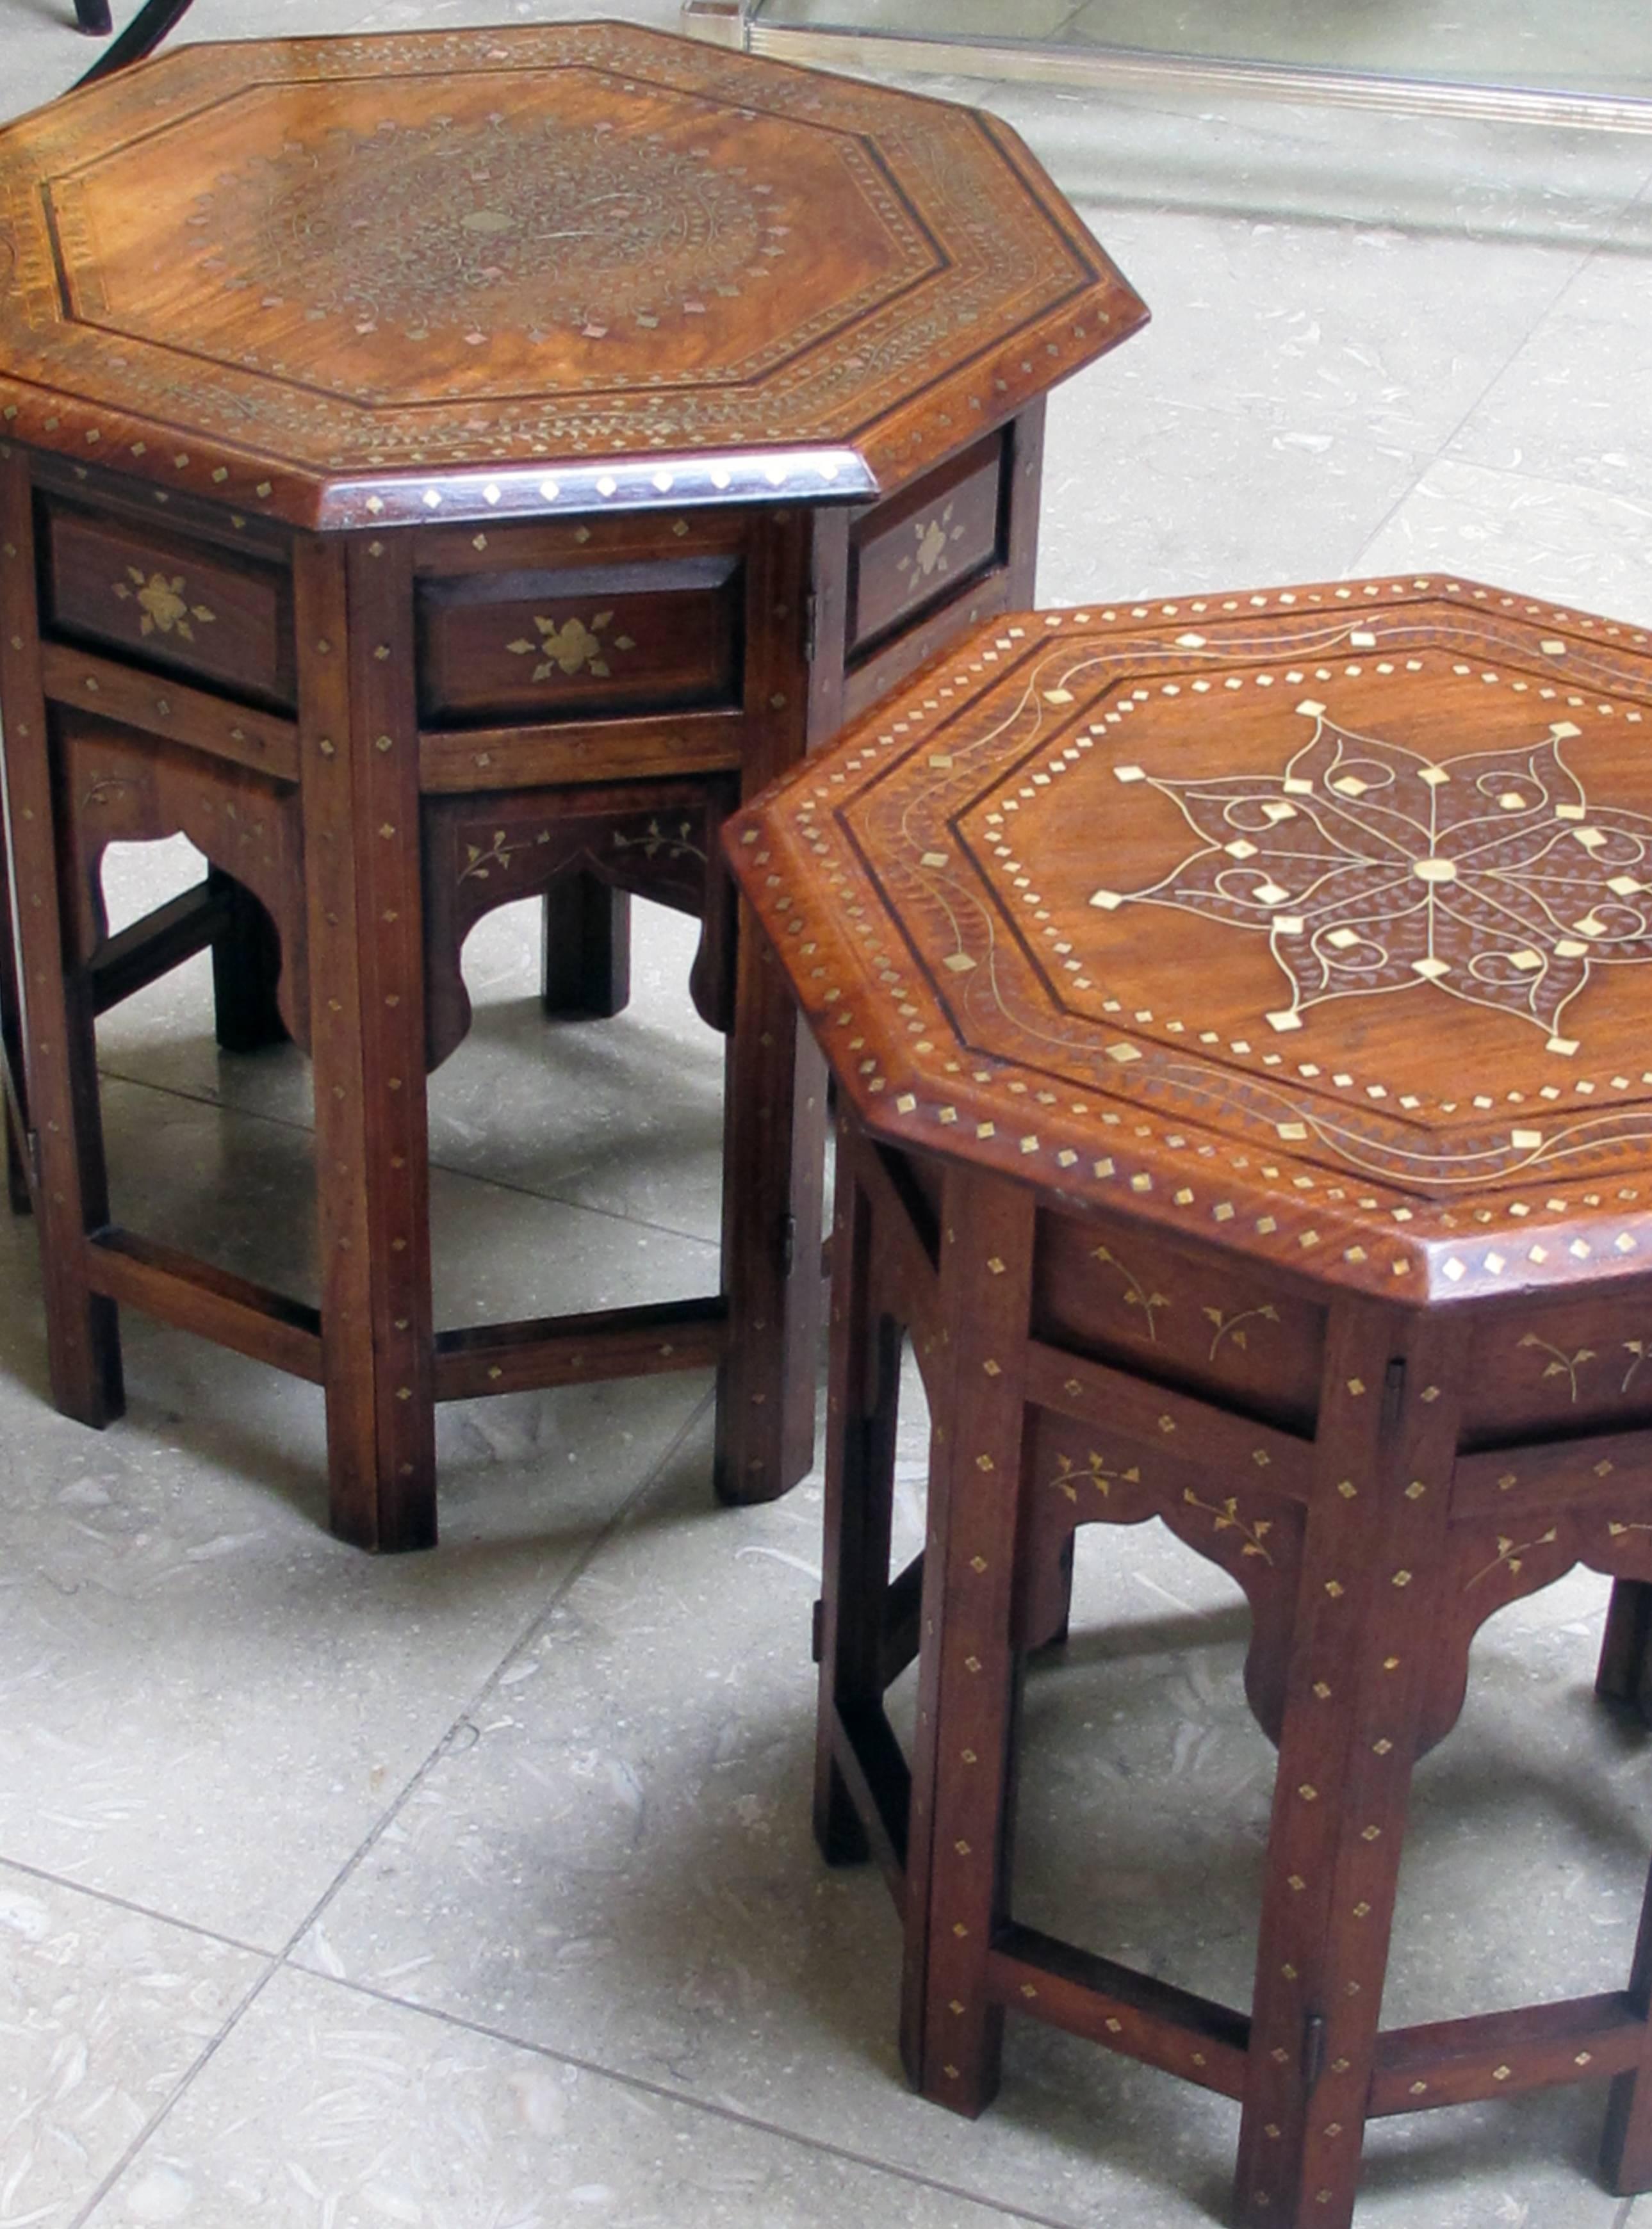 Detailed Brass and Pewter Inlaid Octagonal Anglo-Indian Traveling Table 2